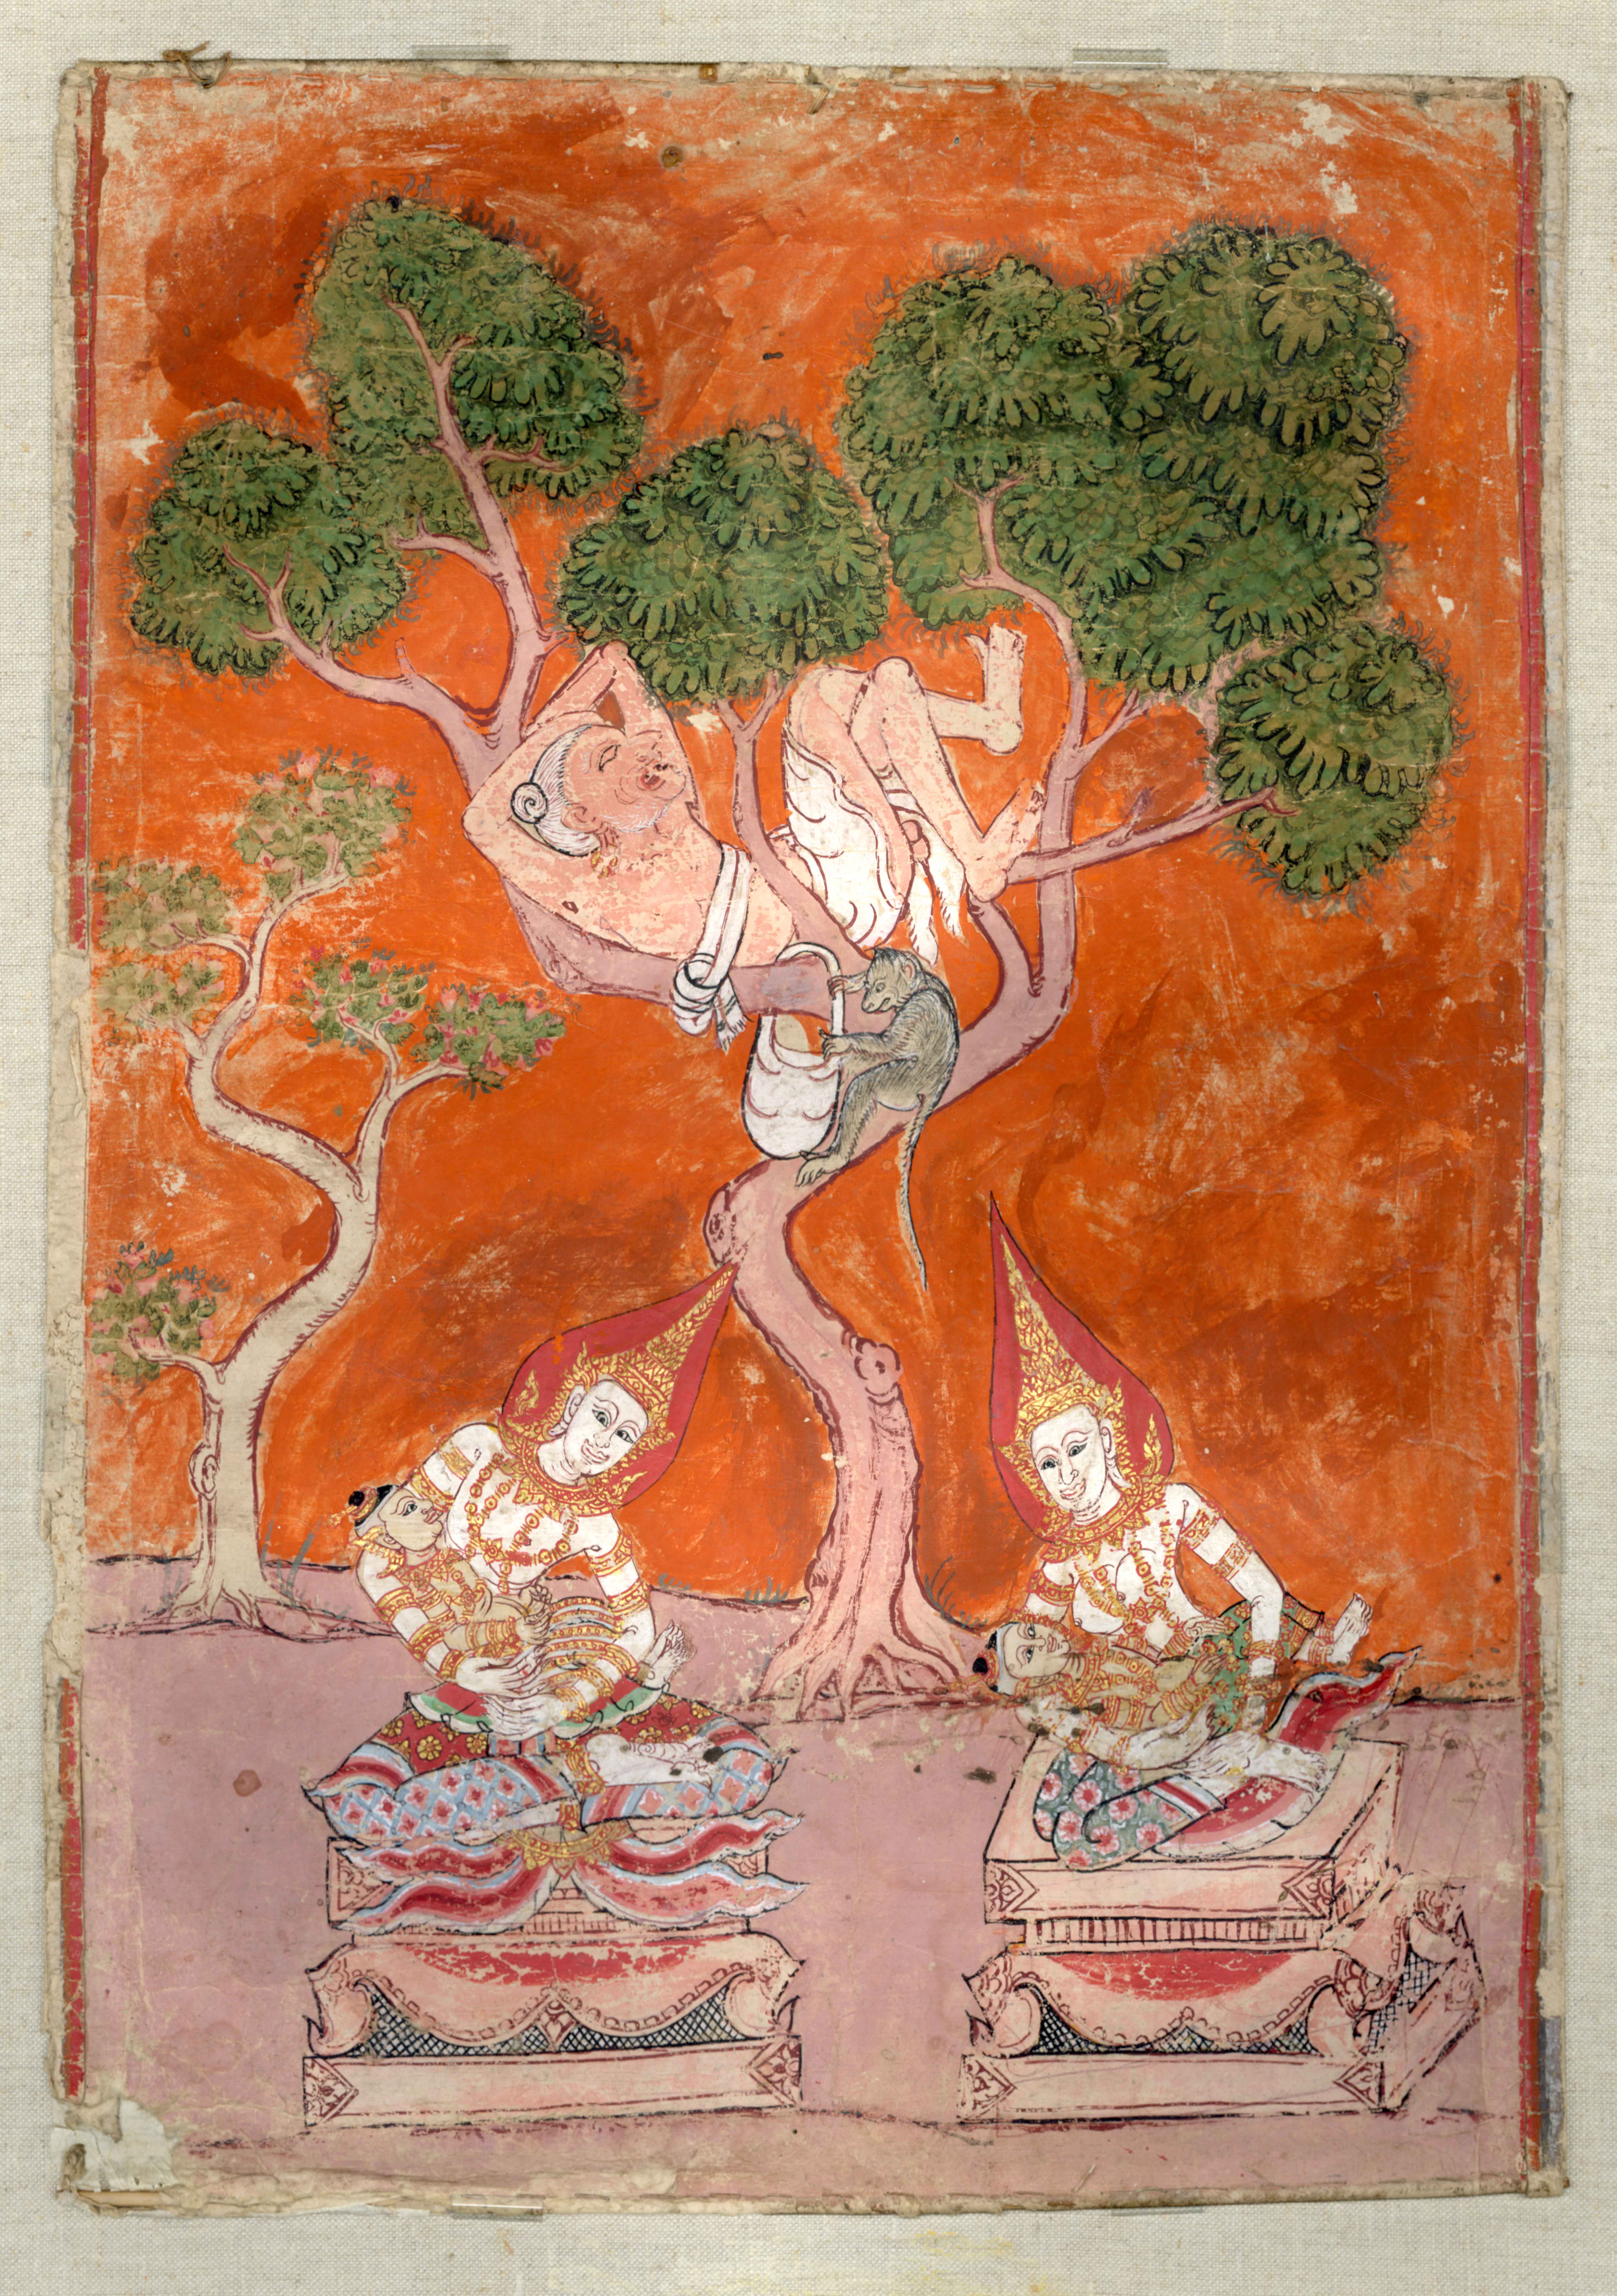 A figure is resting in a Bo tree against a red background. Two figures in the foreground are cradling infants in their arms. 